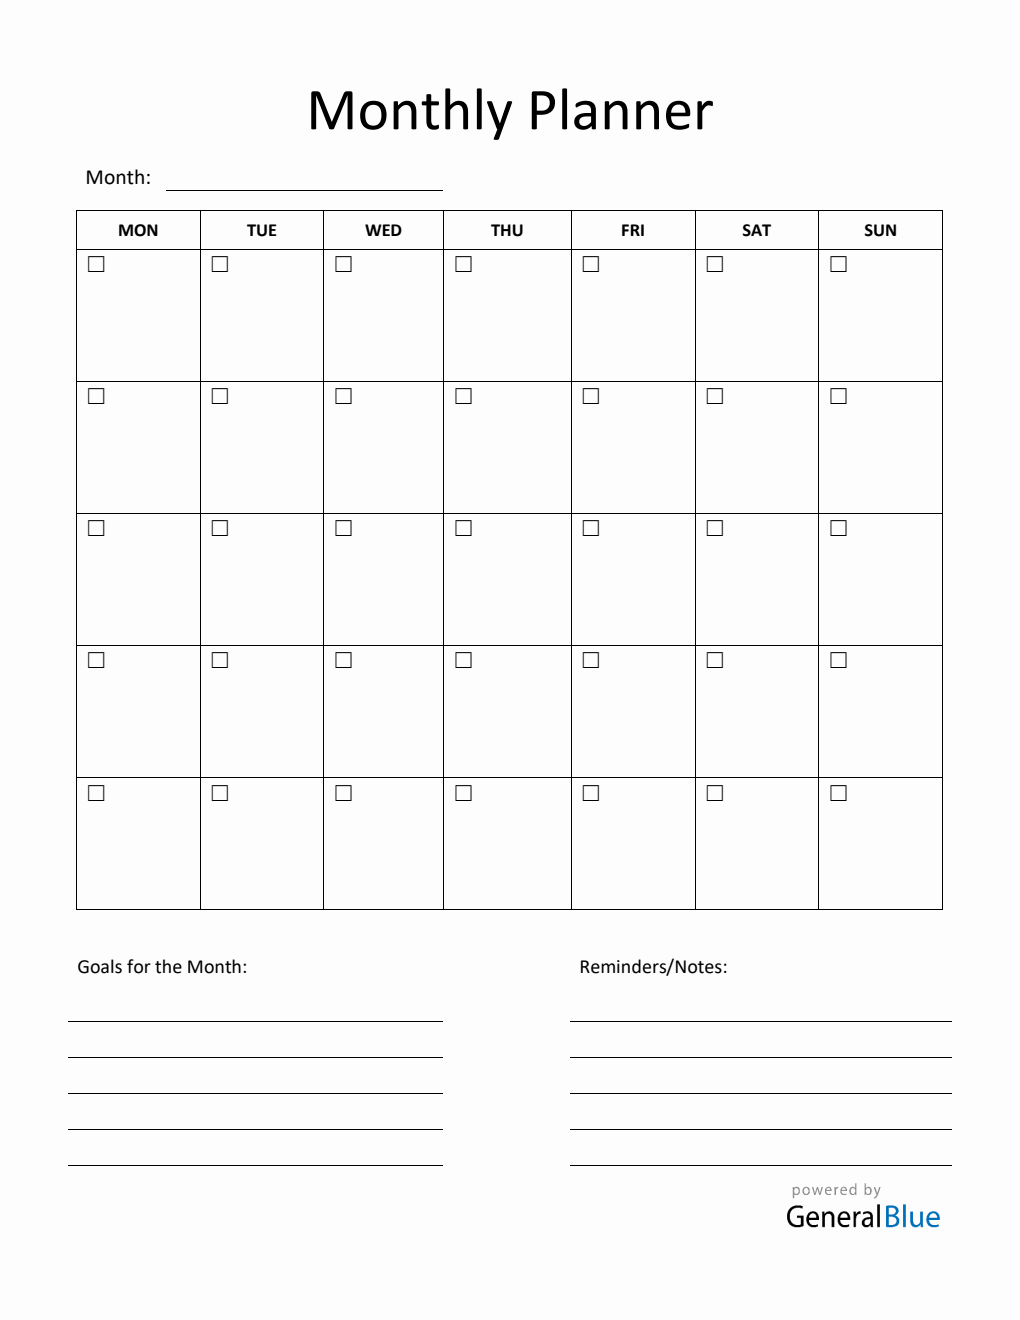 Monthly Planner in Word